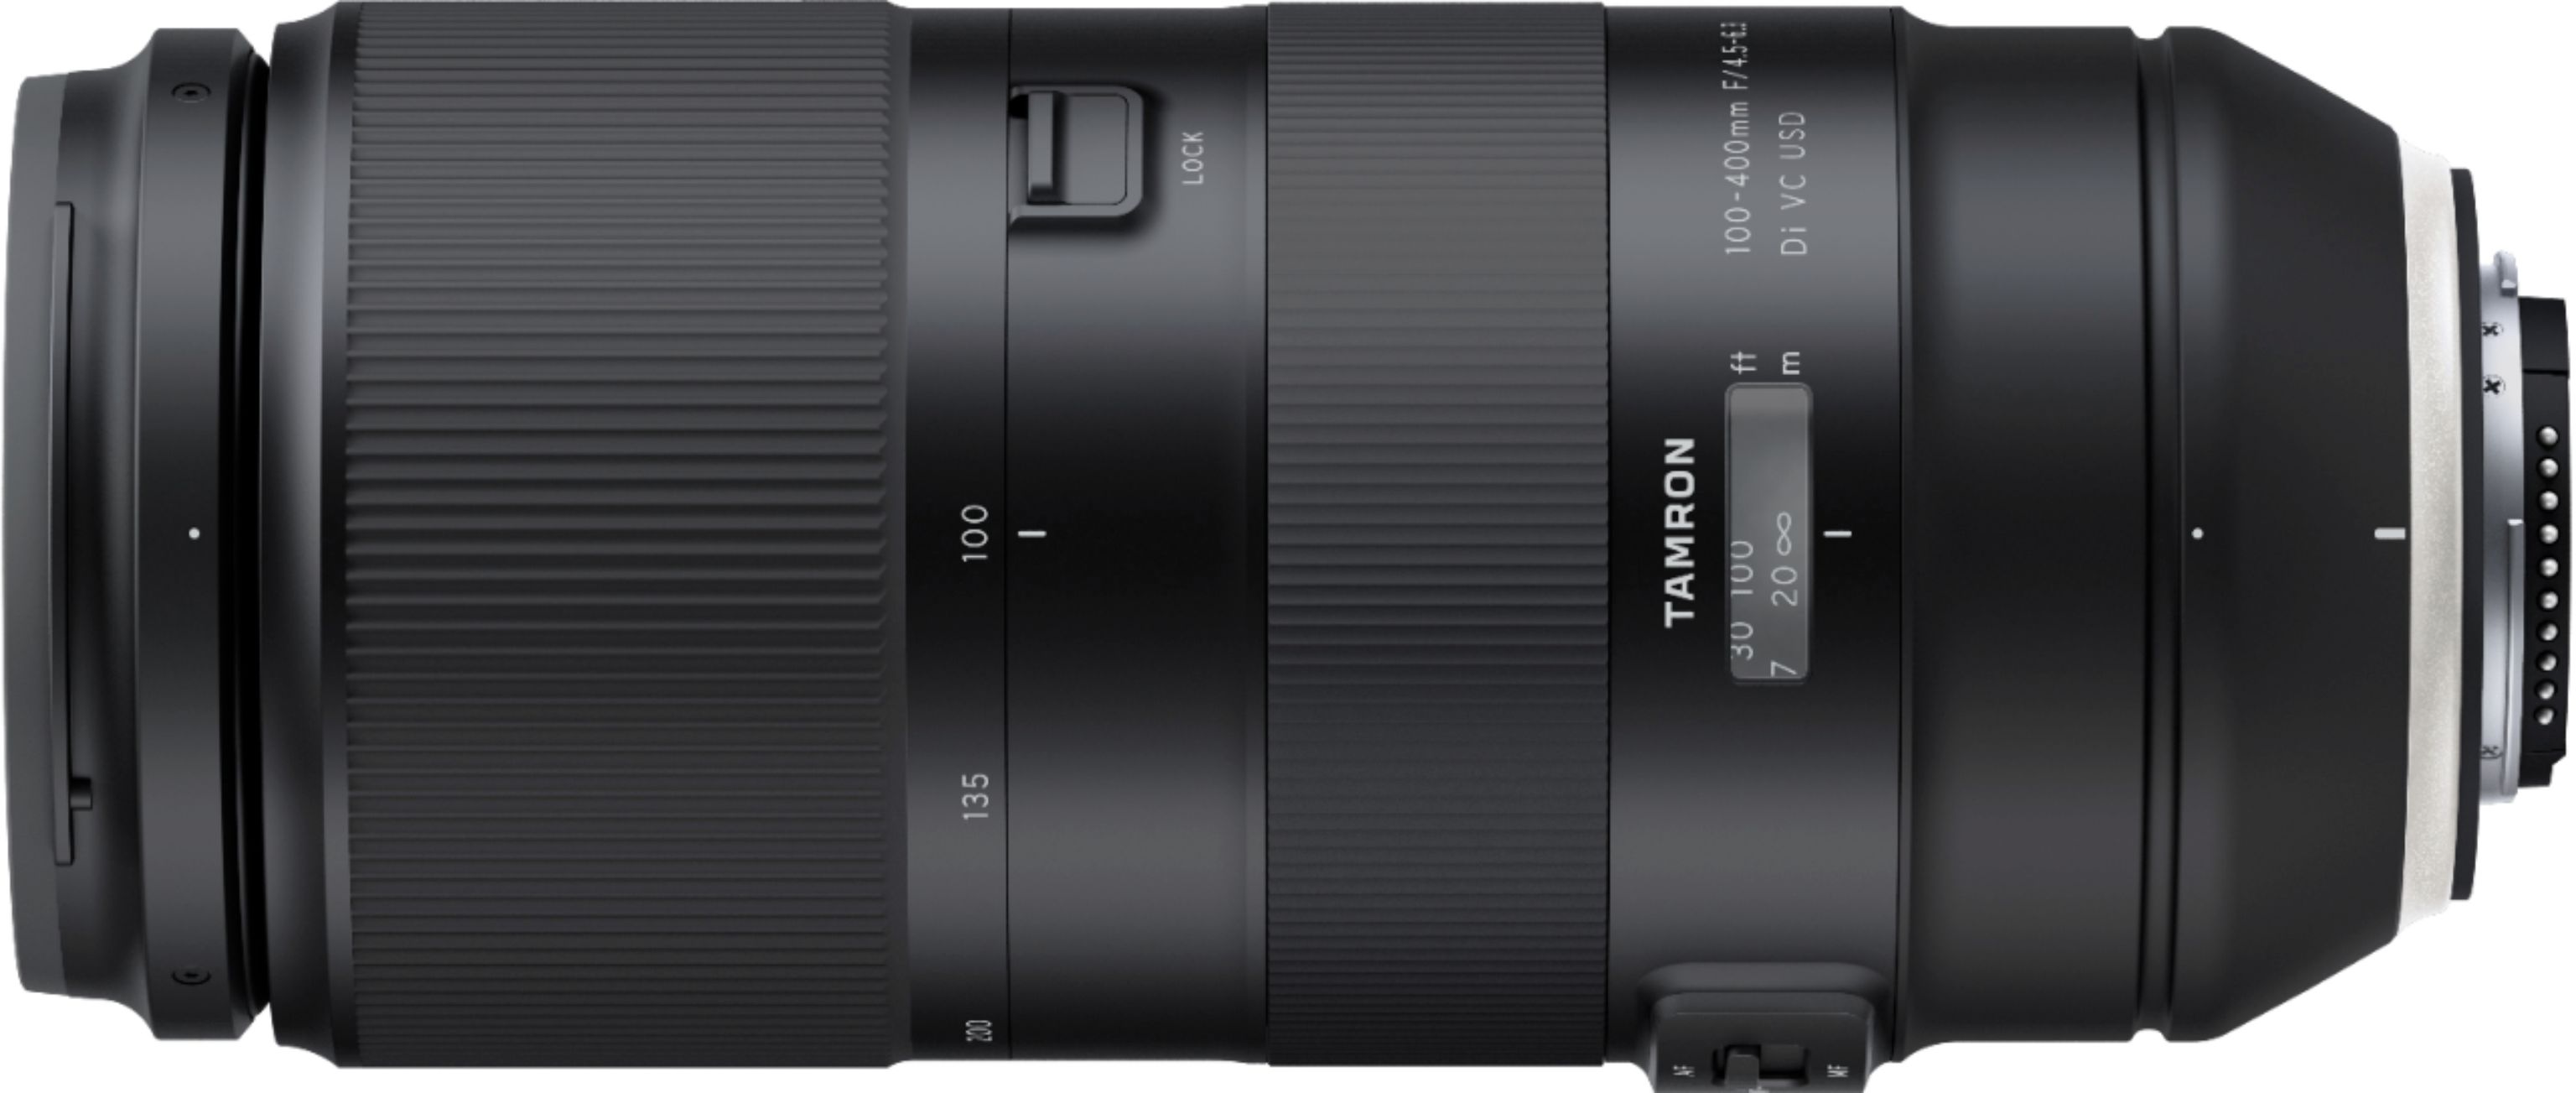 Best Buy: Tamron 100-400mm F/4.5-6.3 Di VC USD Telephoto Zoom Lens 